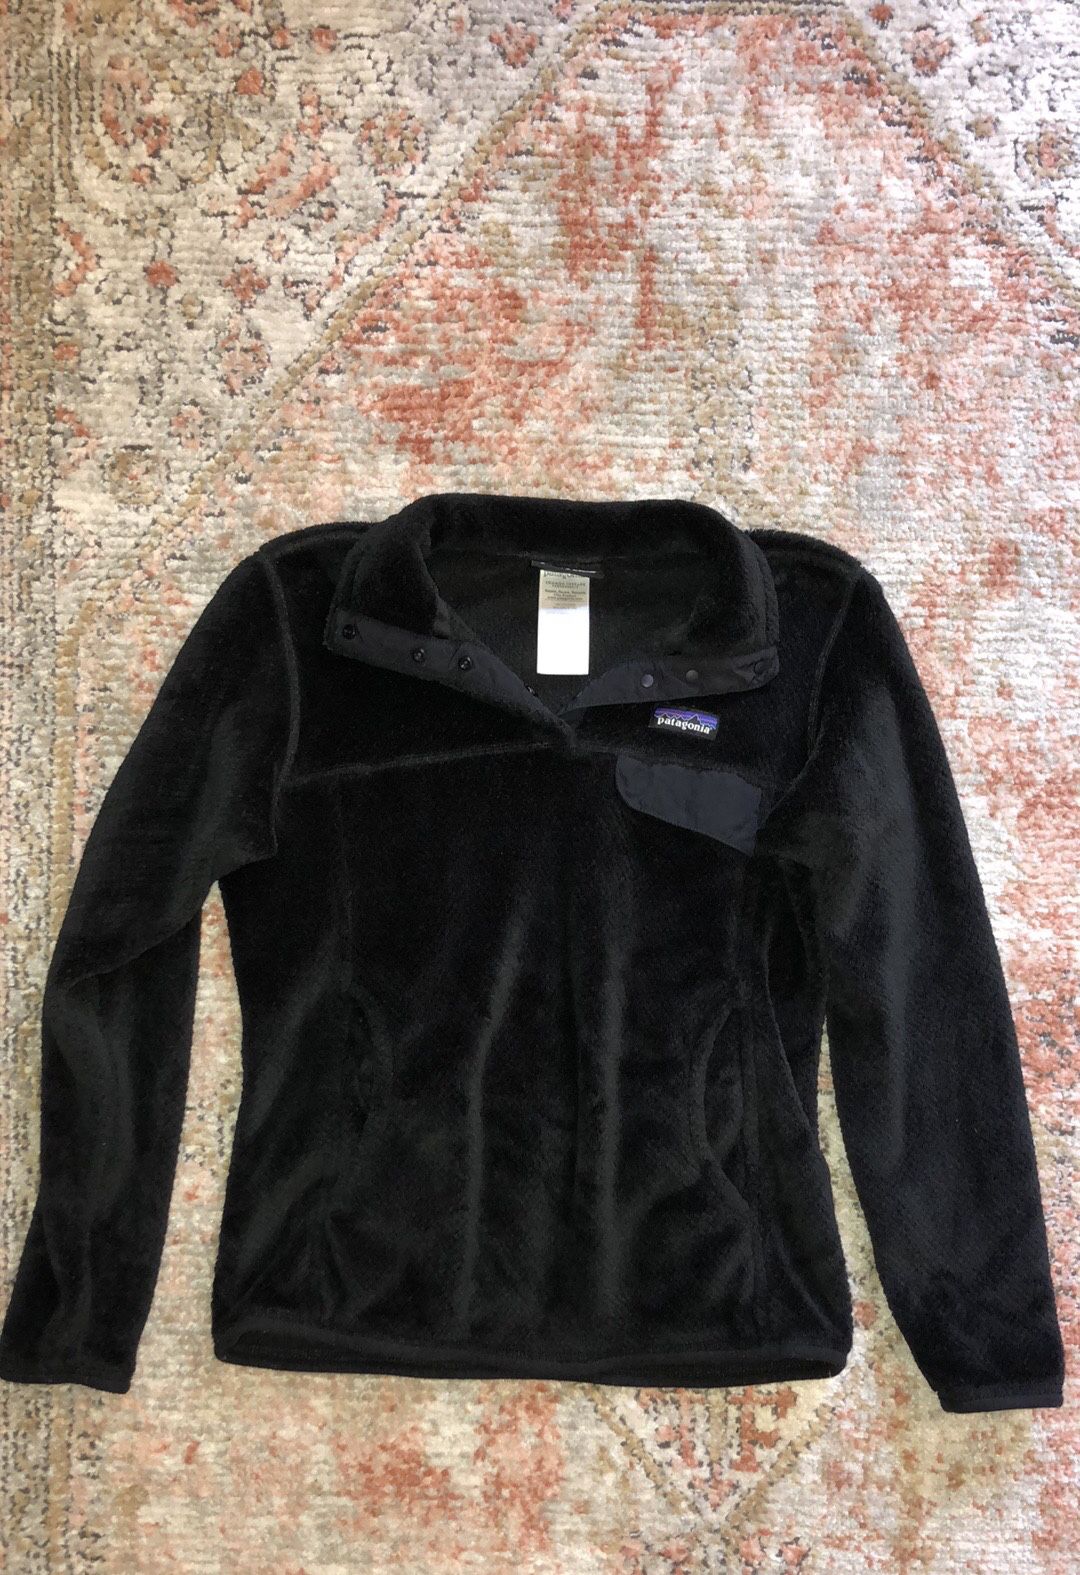 Womens Patagonia Pullover Jacket - small